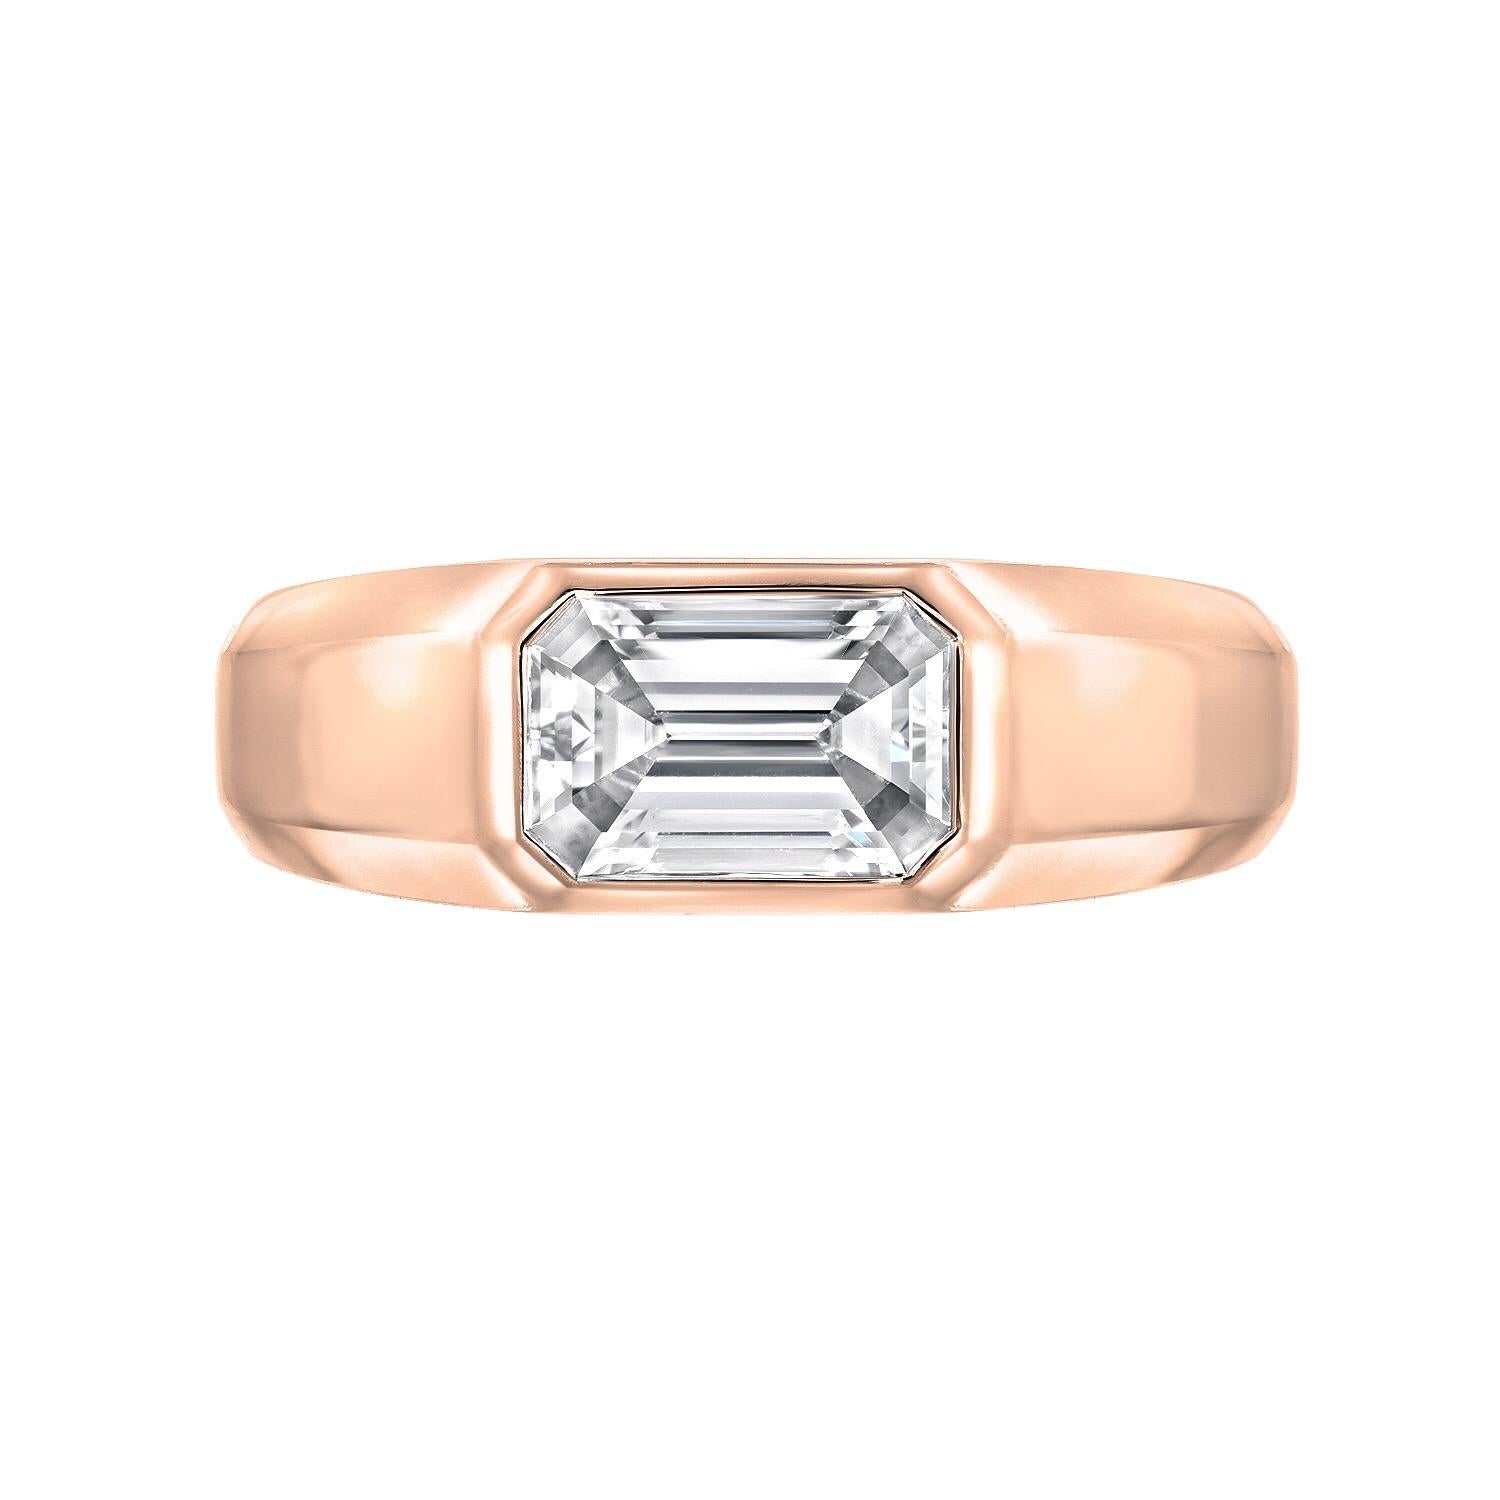 Emerald Cut diamond ring featuring a G.I.A certified 1.03 carat E color and VVS1 clarity emerald cut diamond set in a pristine, hand crafted, 18K rose gold unisex ring. 
The G.I.A certificate is attached to the images for your convenience. 
Please